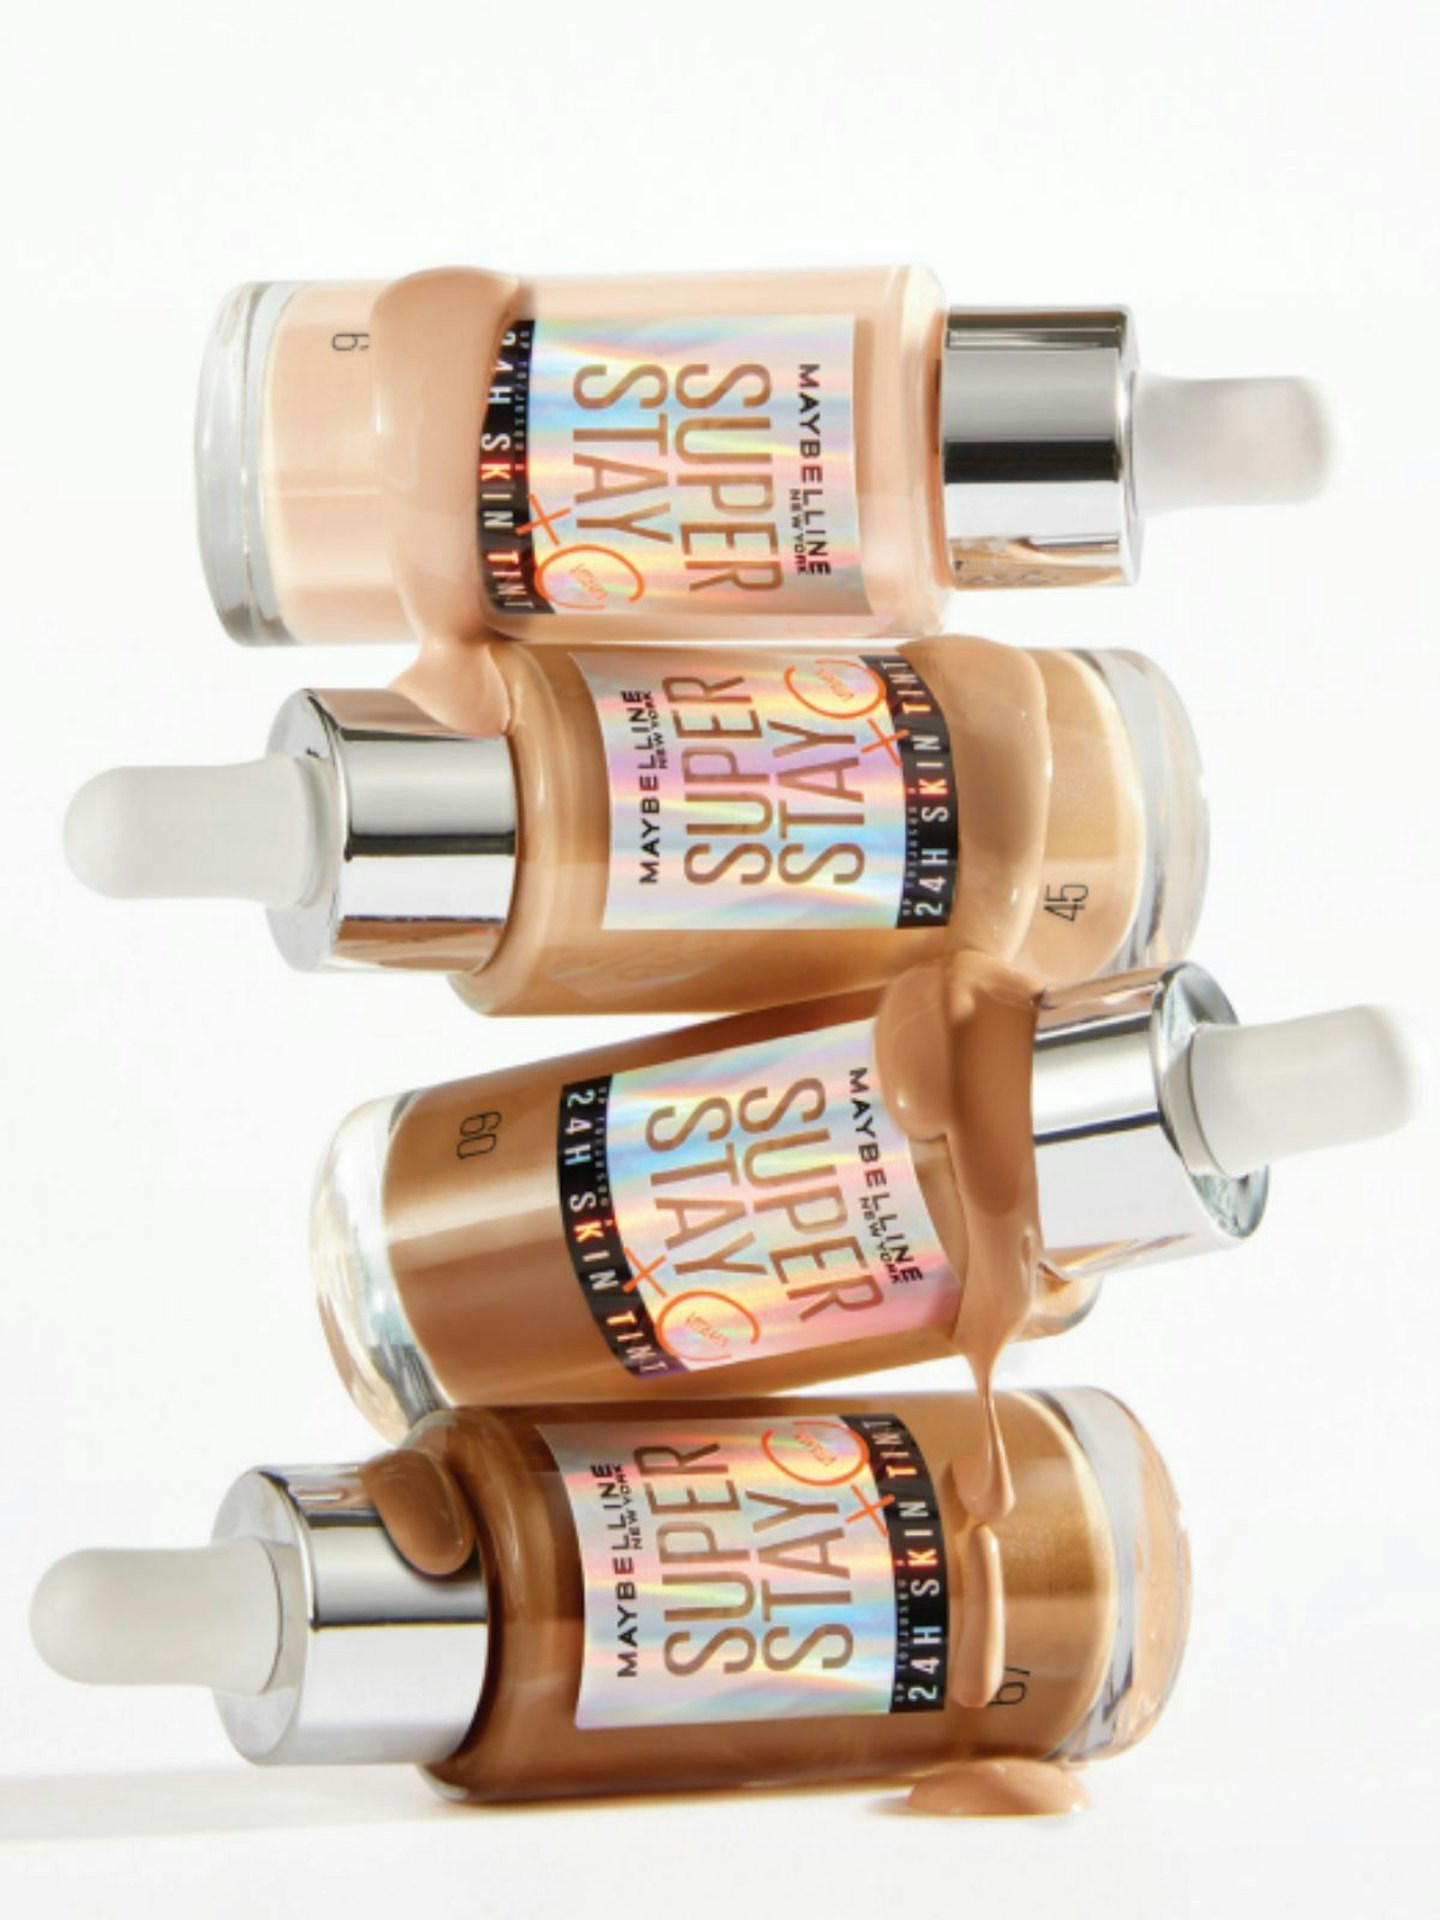  Maybelline Super Stay Up to 24HR Skin Tint, Radiant